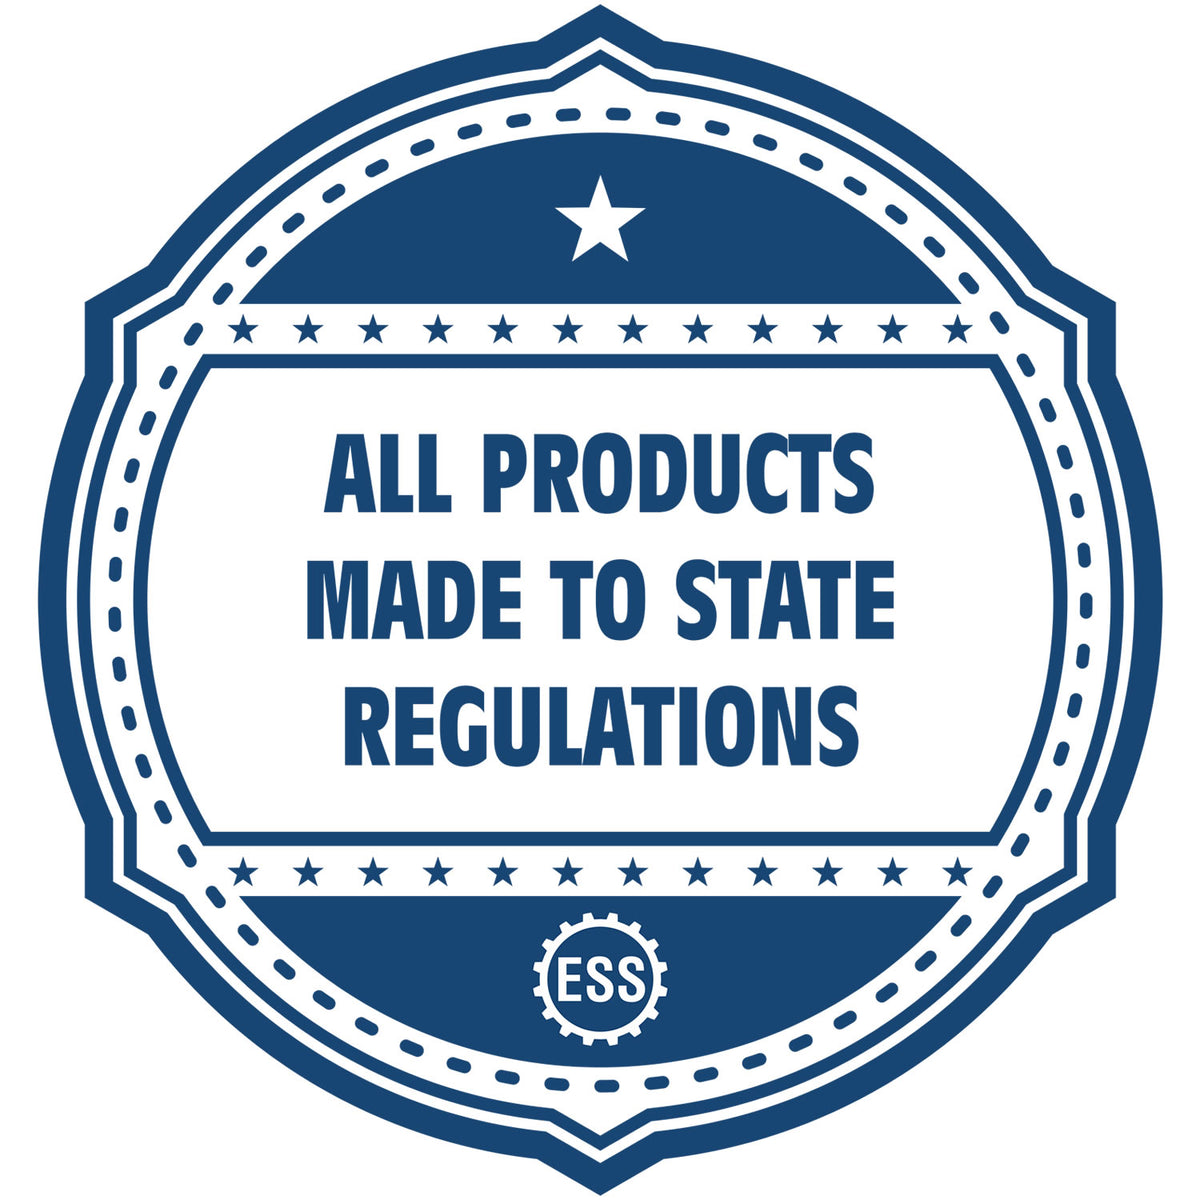 An icon or badge element for the Heavy Duty Cast Iron Indiana Engineer Seal Embosser showing that this product is made in compliance with state regulations.